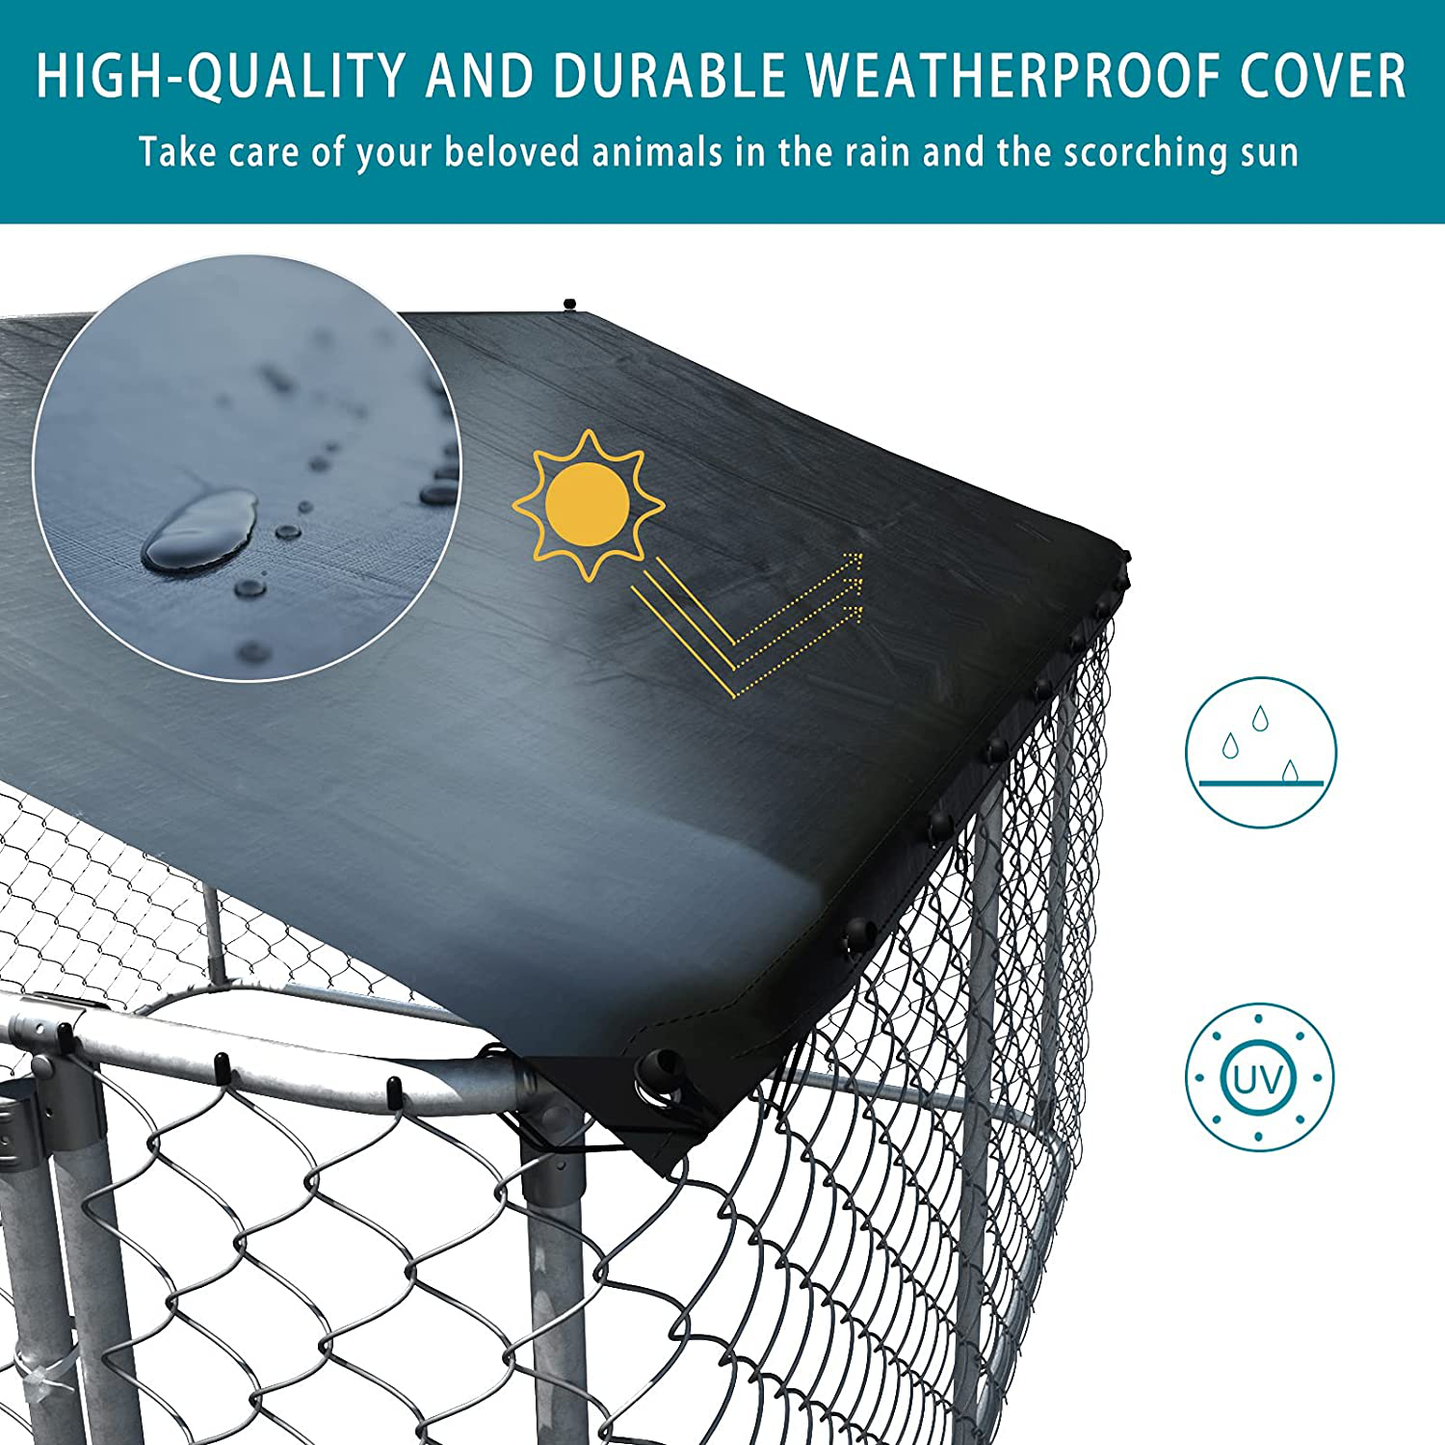 AKANORS Outdoor Chain Link Dog Kennel with Weatherproof Cover - Large Heavy Duty Pet House Run Exercise Playpen for Training - Chicken Coop Hen Cage Durable Galvanized Steel Frame Animals & Pet Supplies > Pet Supplies > Dog Supplies > Dog Kennels & Runs AKANORS   